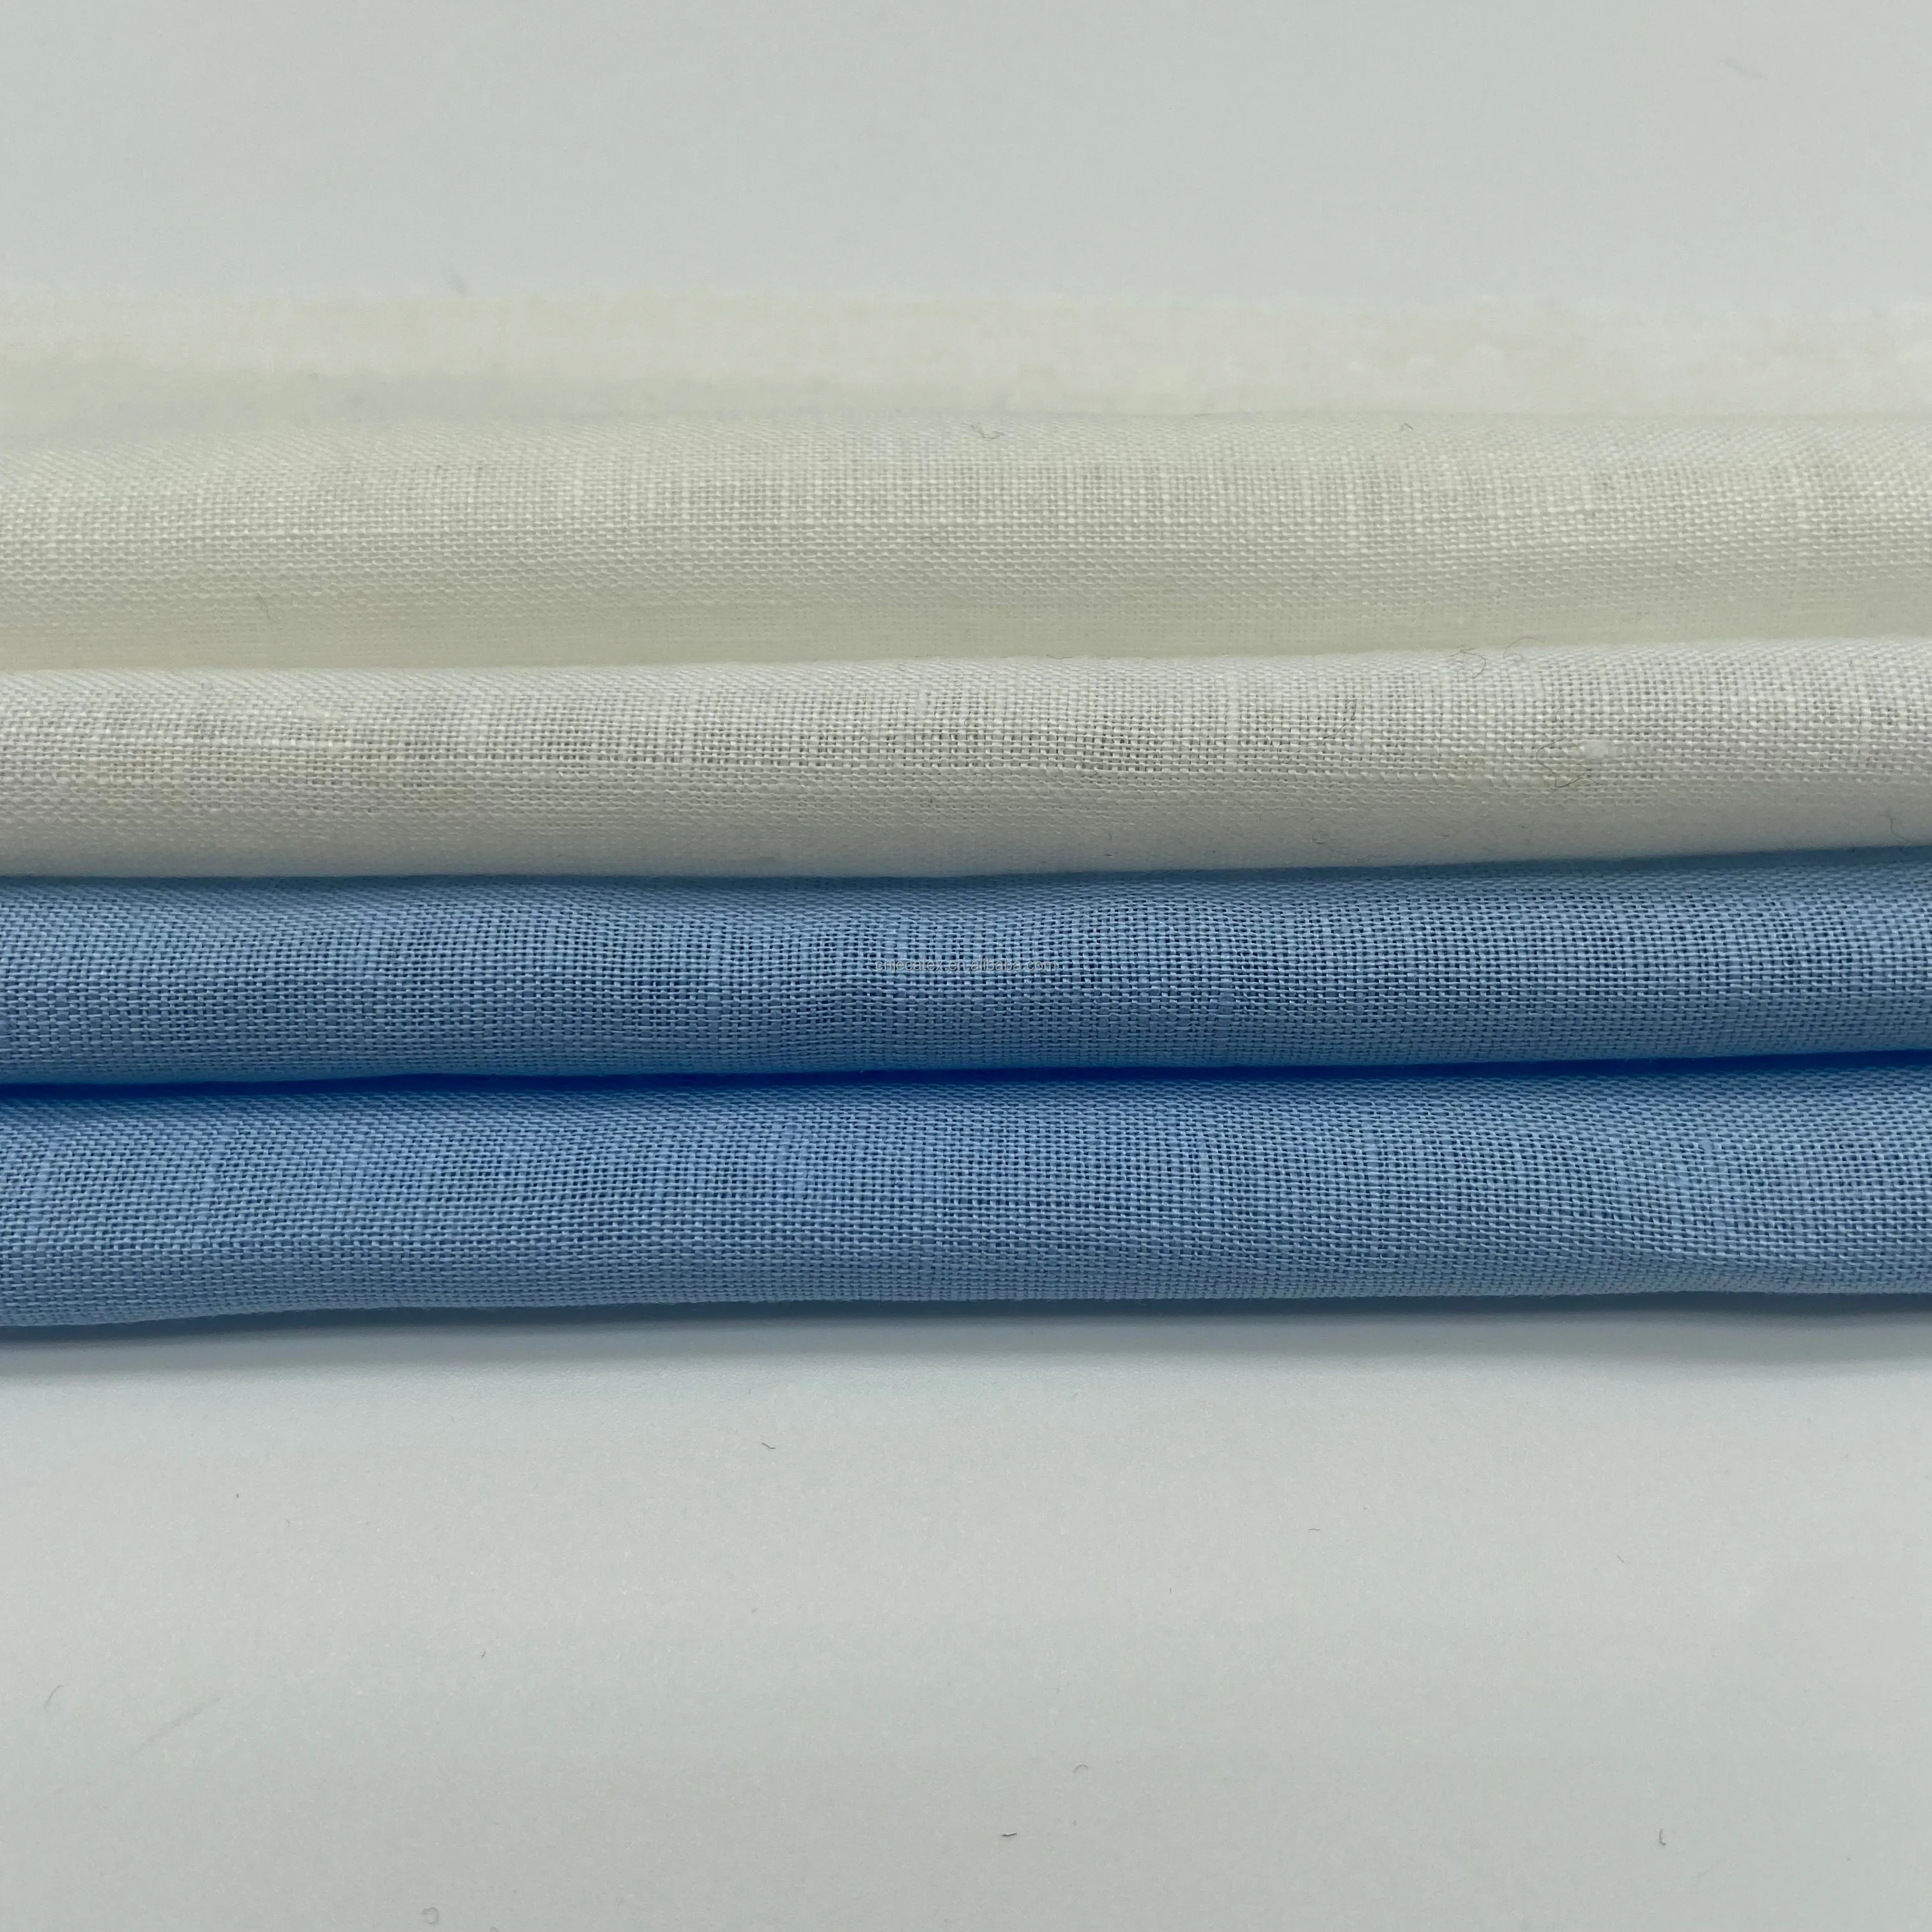 JECATEX BUDAPEST/16B    58% Linen 42%cotton Fabric Solid piece dyed   Wholesale  Woven  european flax For Garment menswear